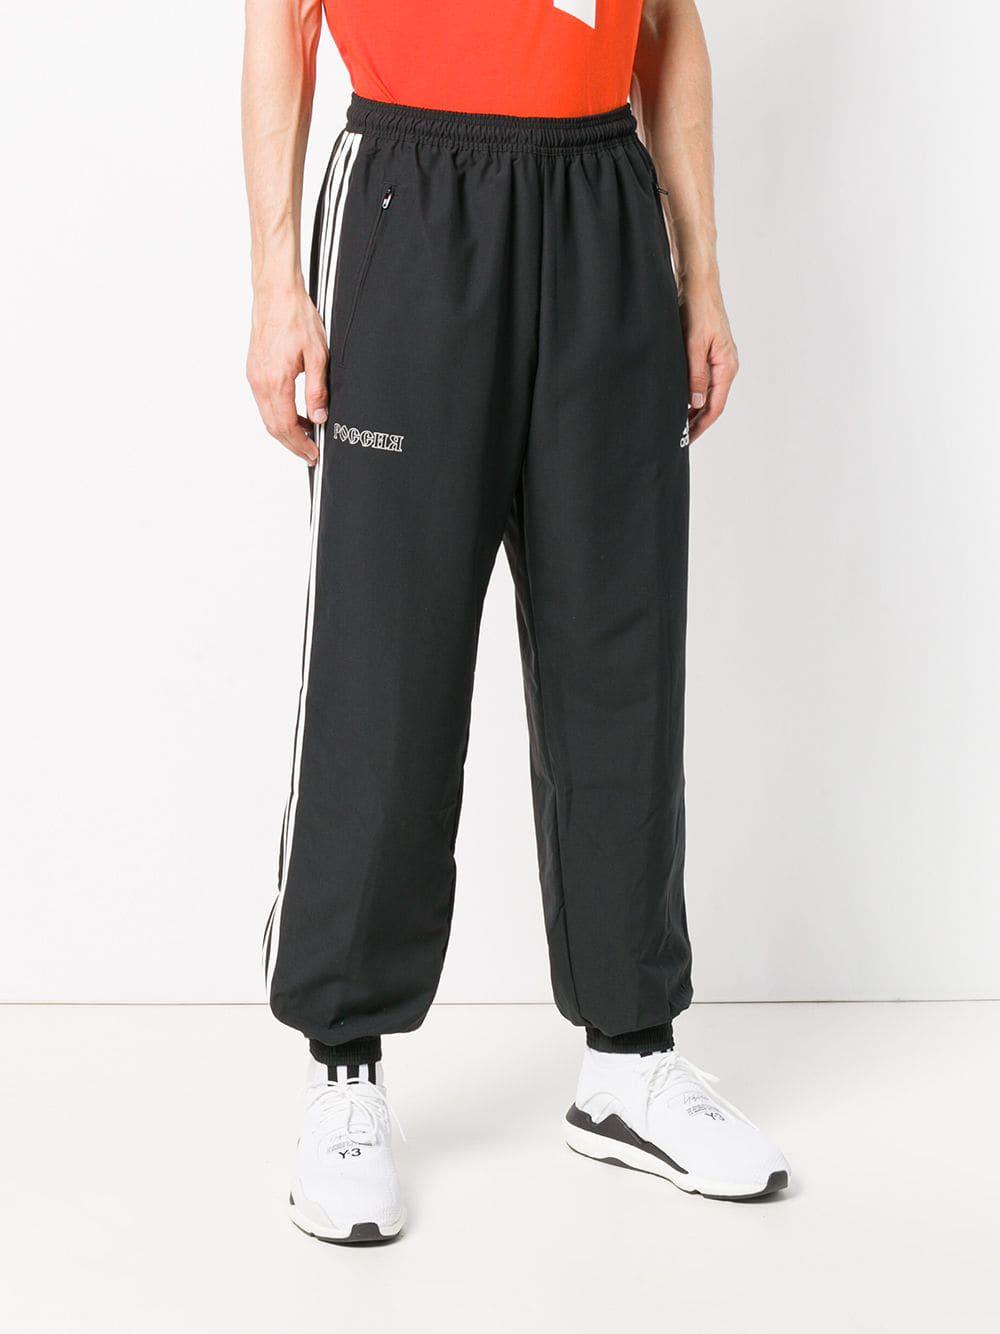 gosha rubchinskiy adidas pants Today's Deals- OFF-54% >Free Delivery